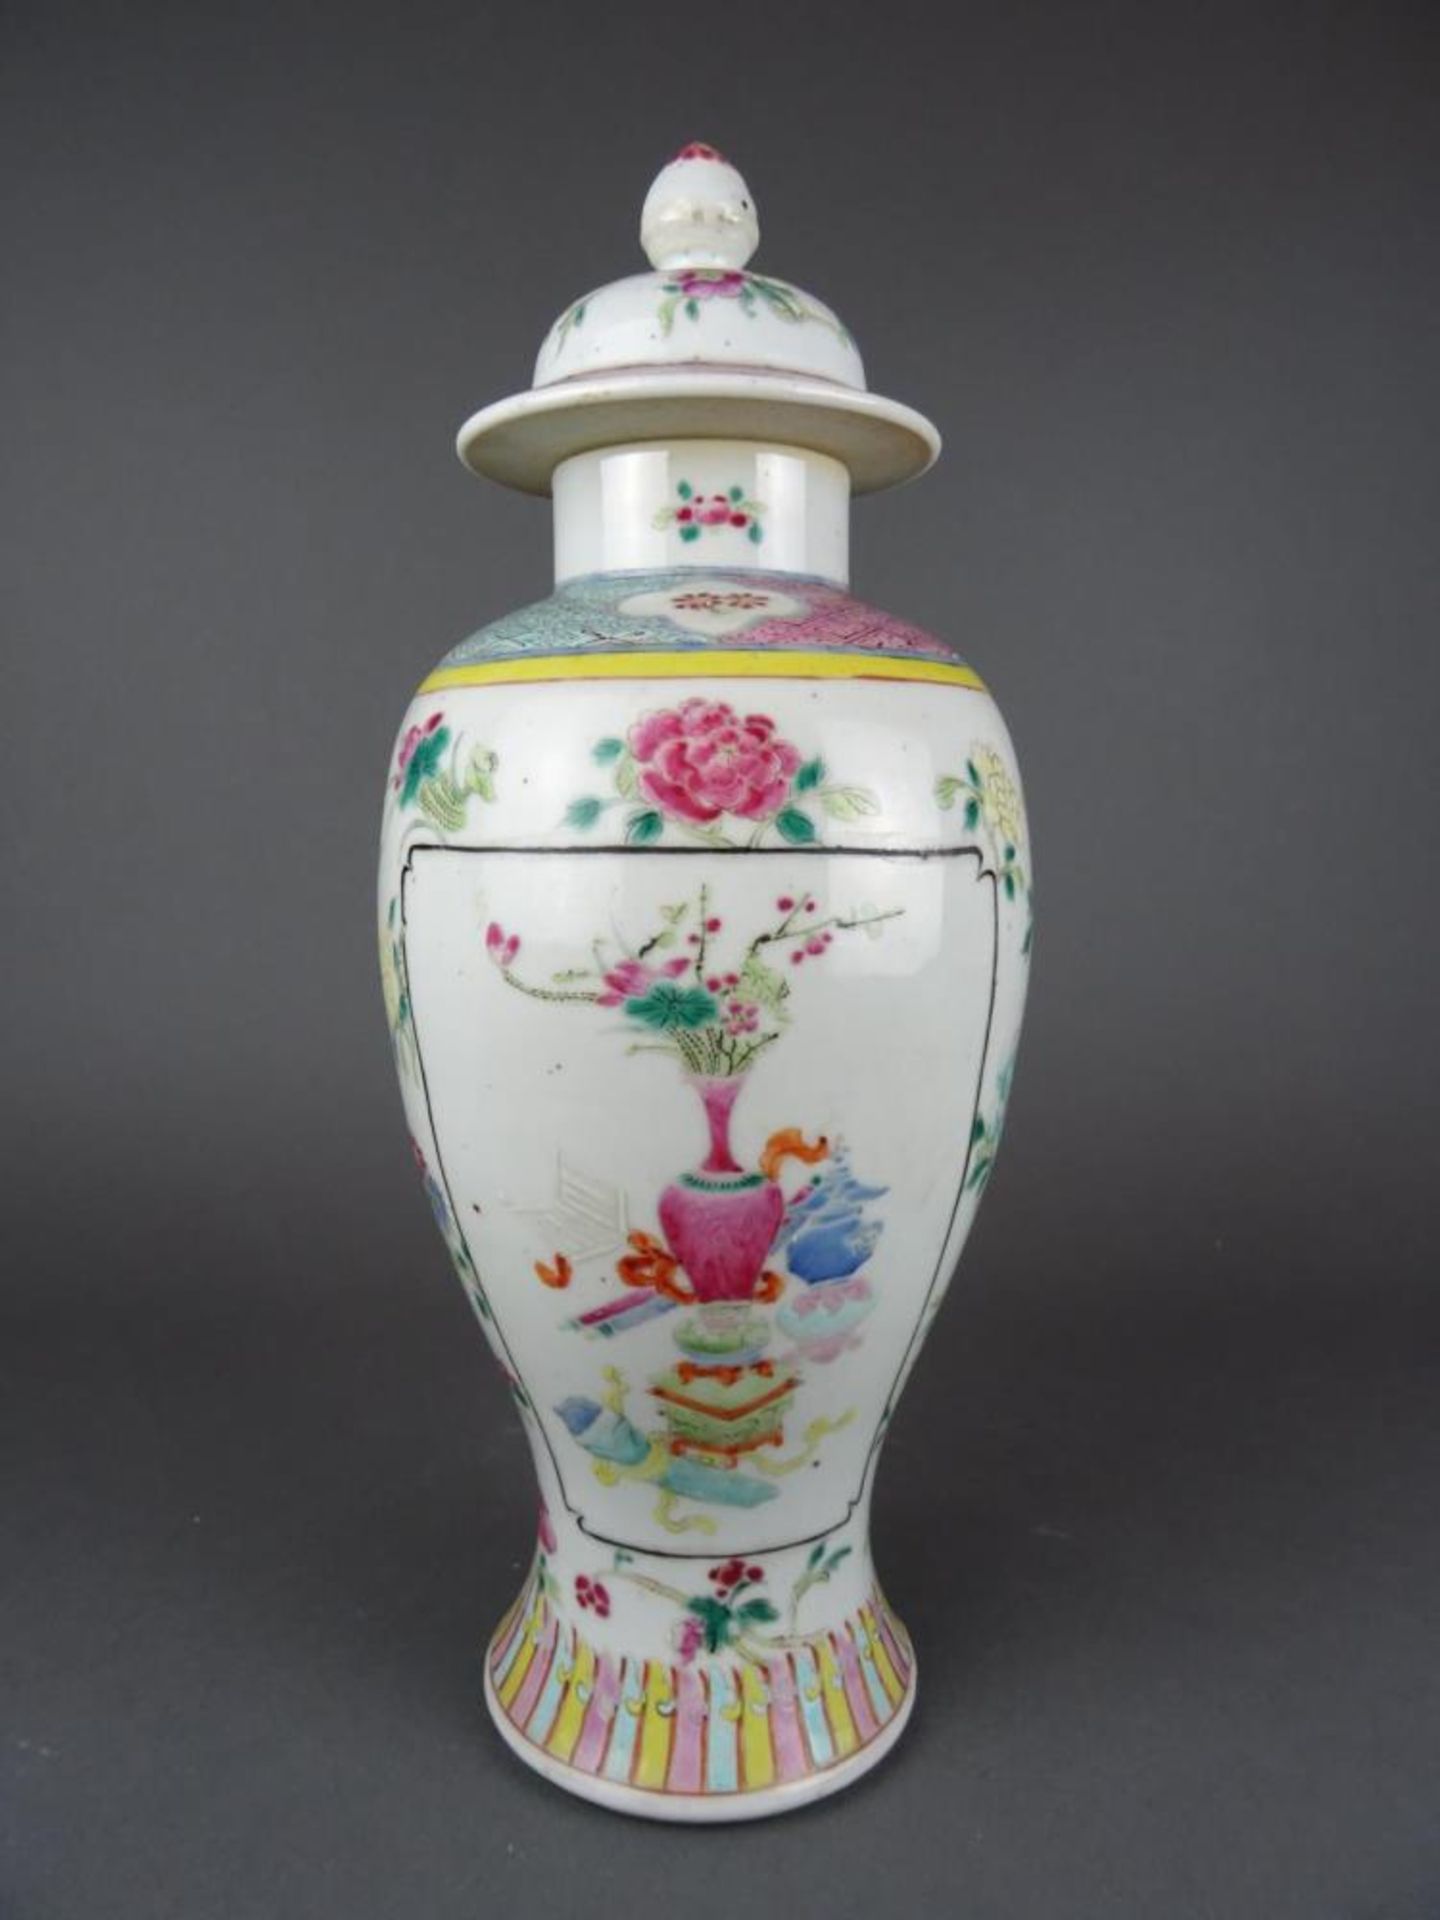 Chinese porcelain Famille rose vase with flowers